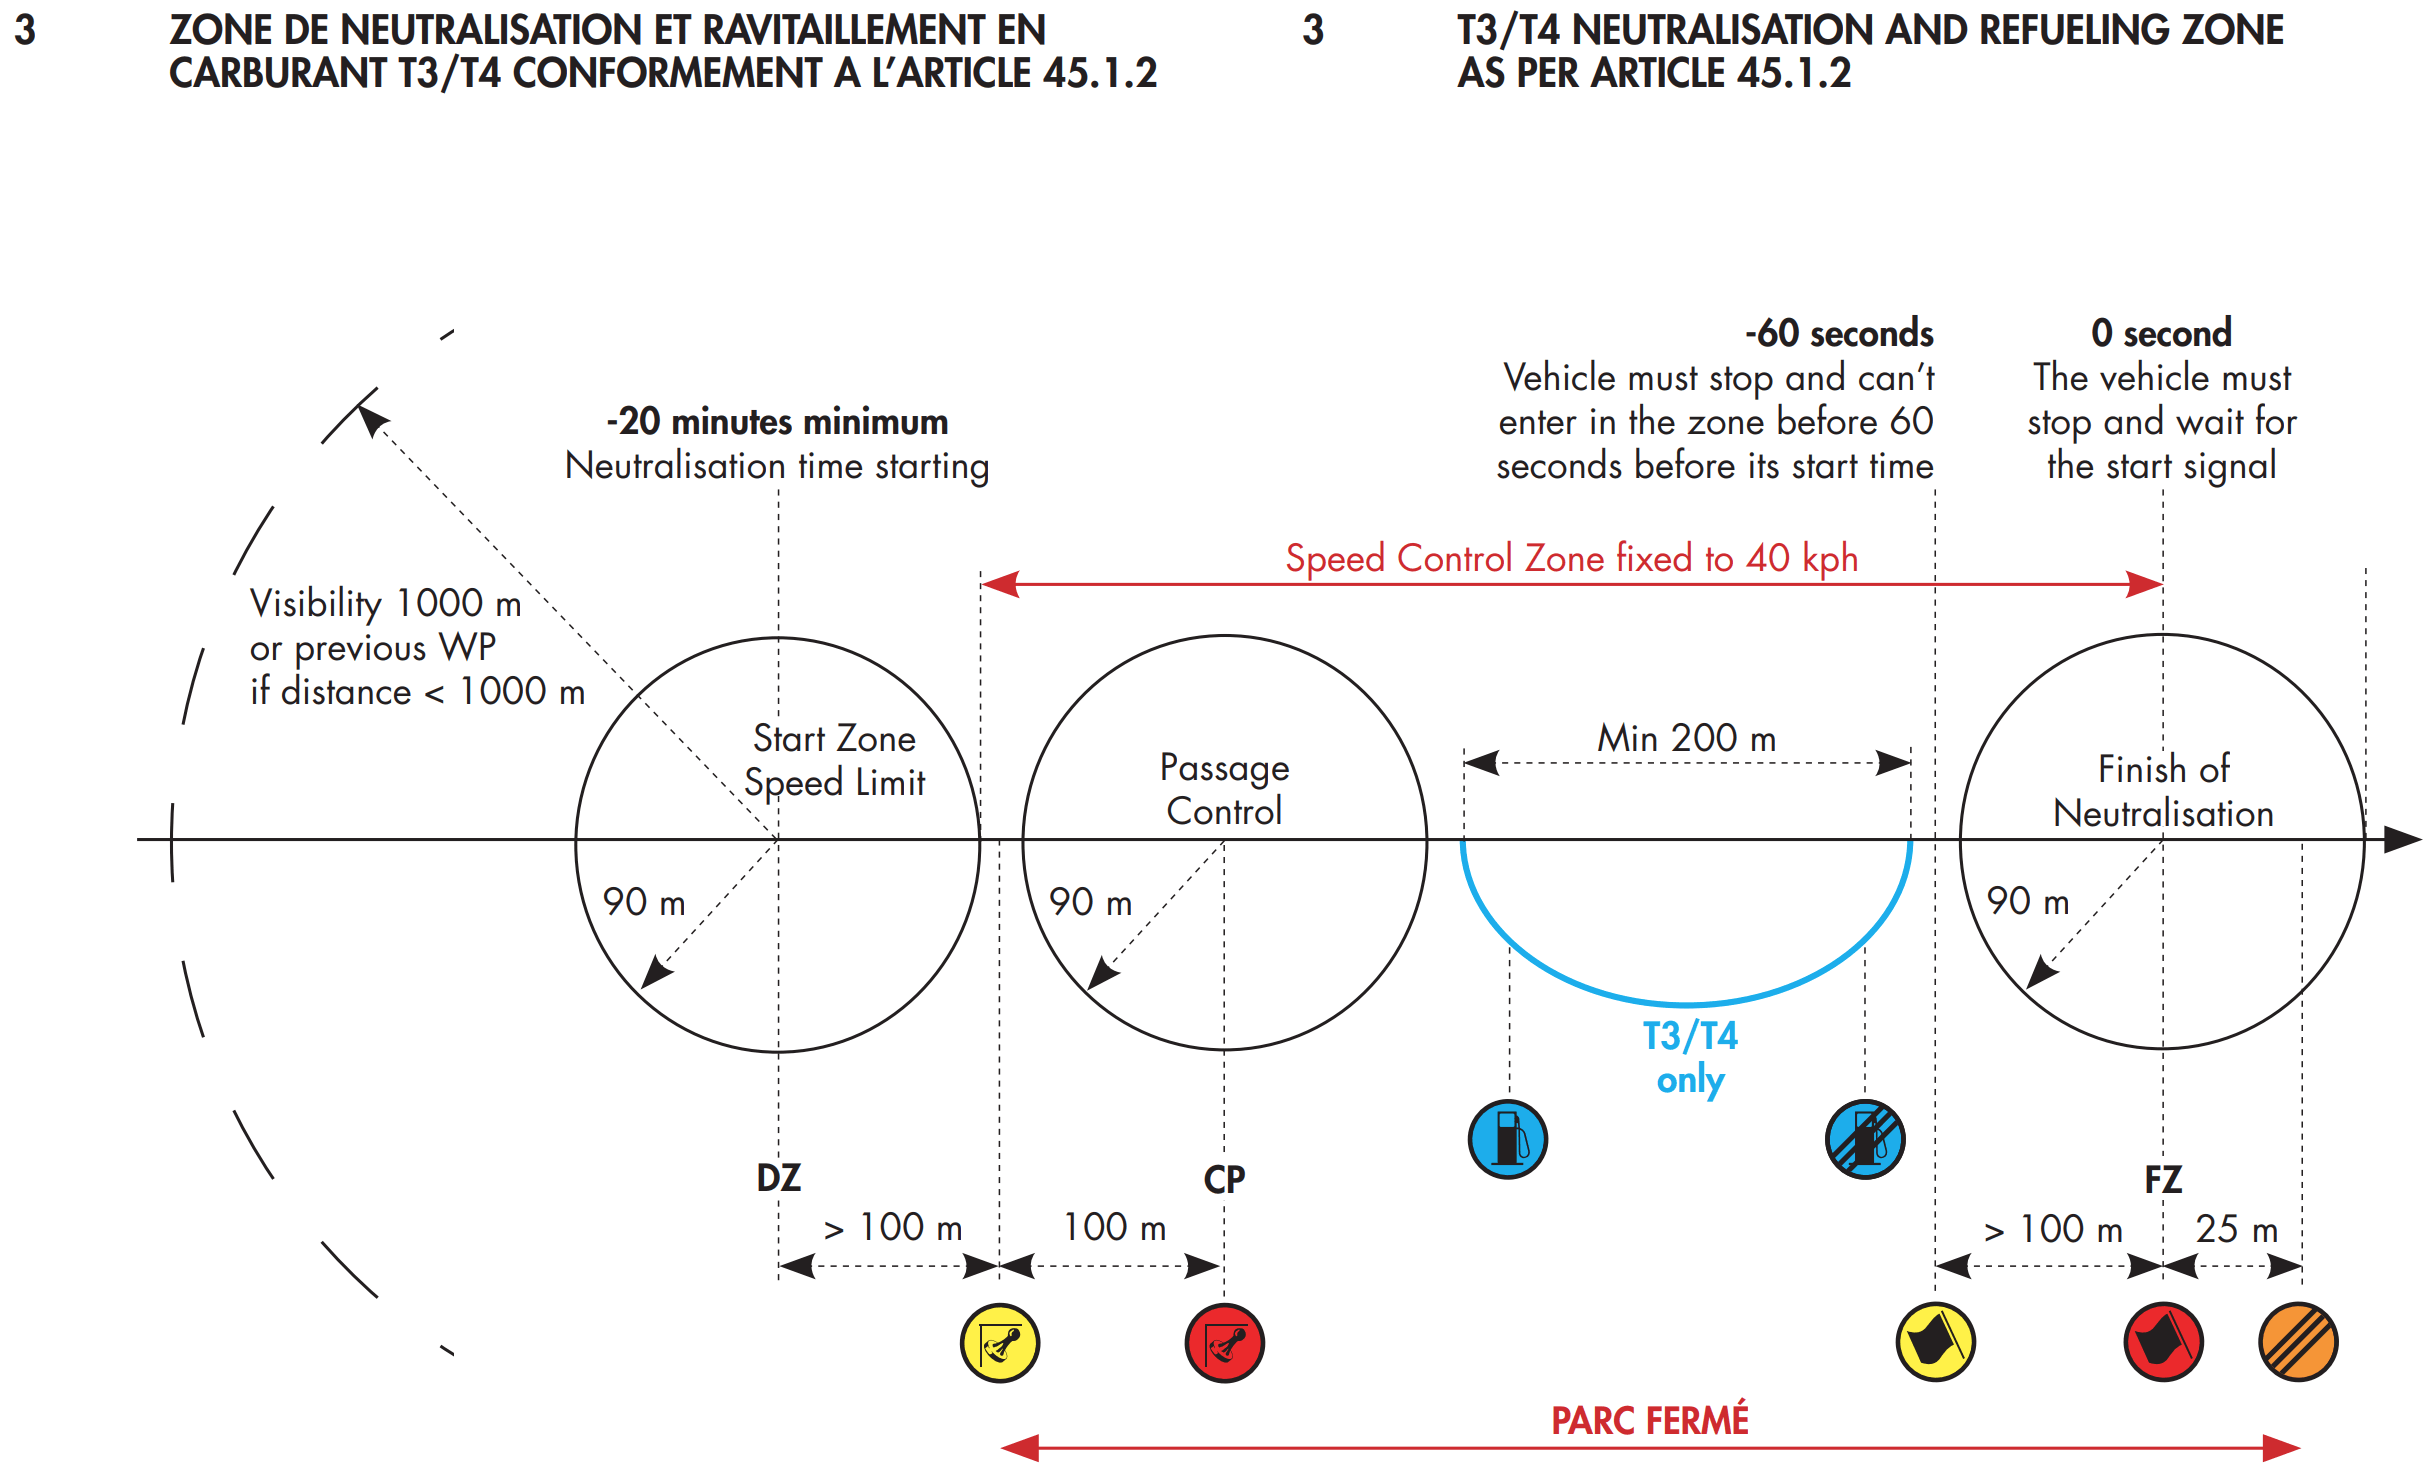 Neutralisation and refueling zone as per article 45.1.2